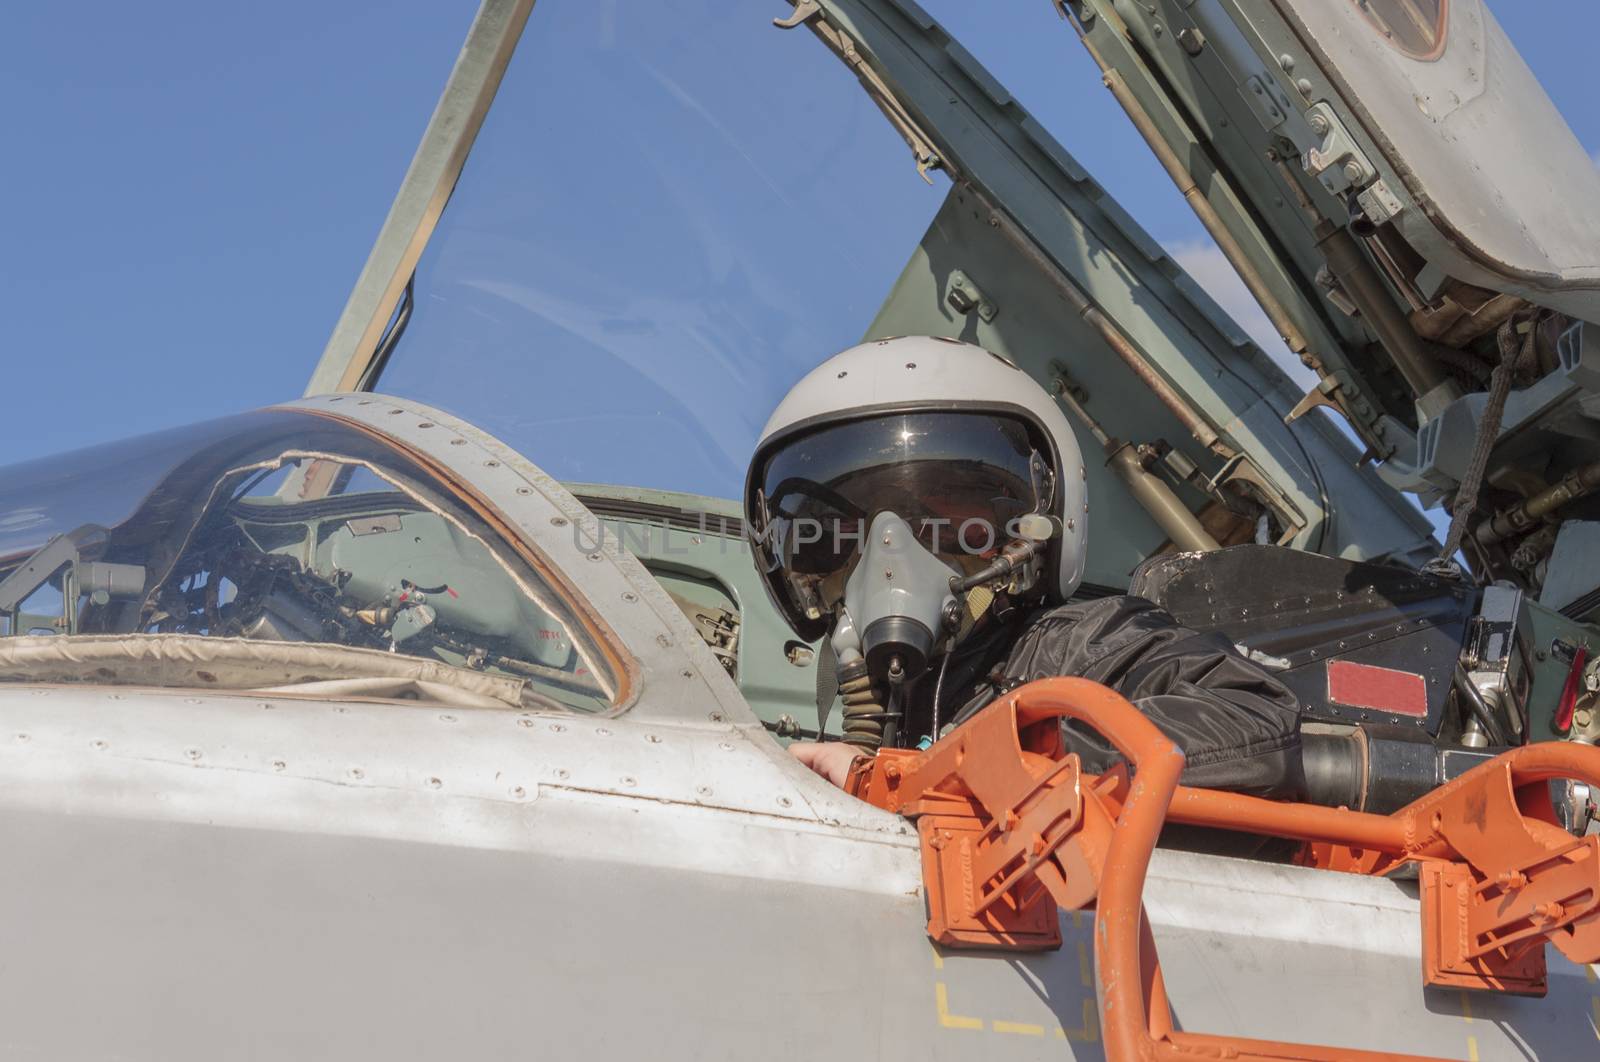 Military pilot in the cockpit of a jet aircraft by aarrows